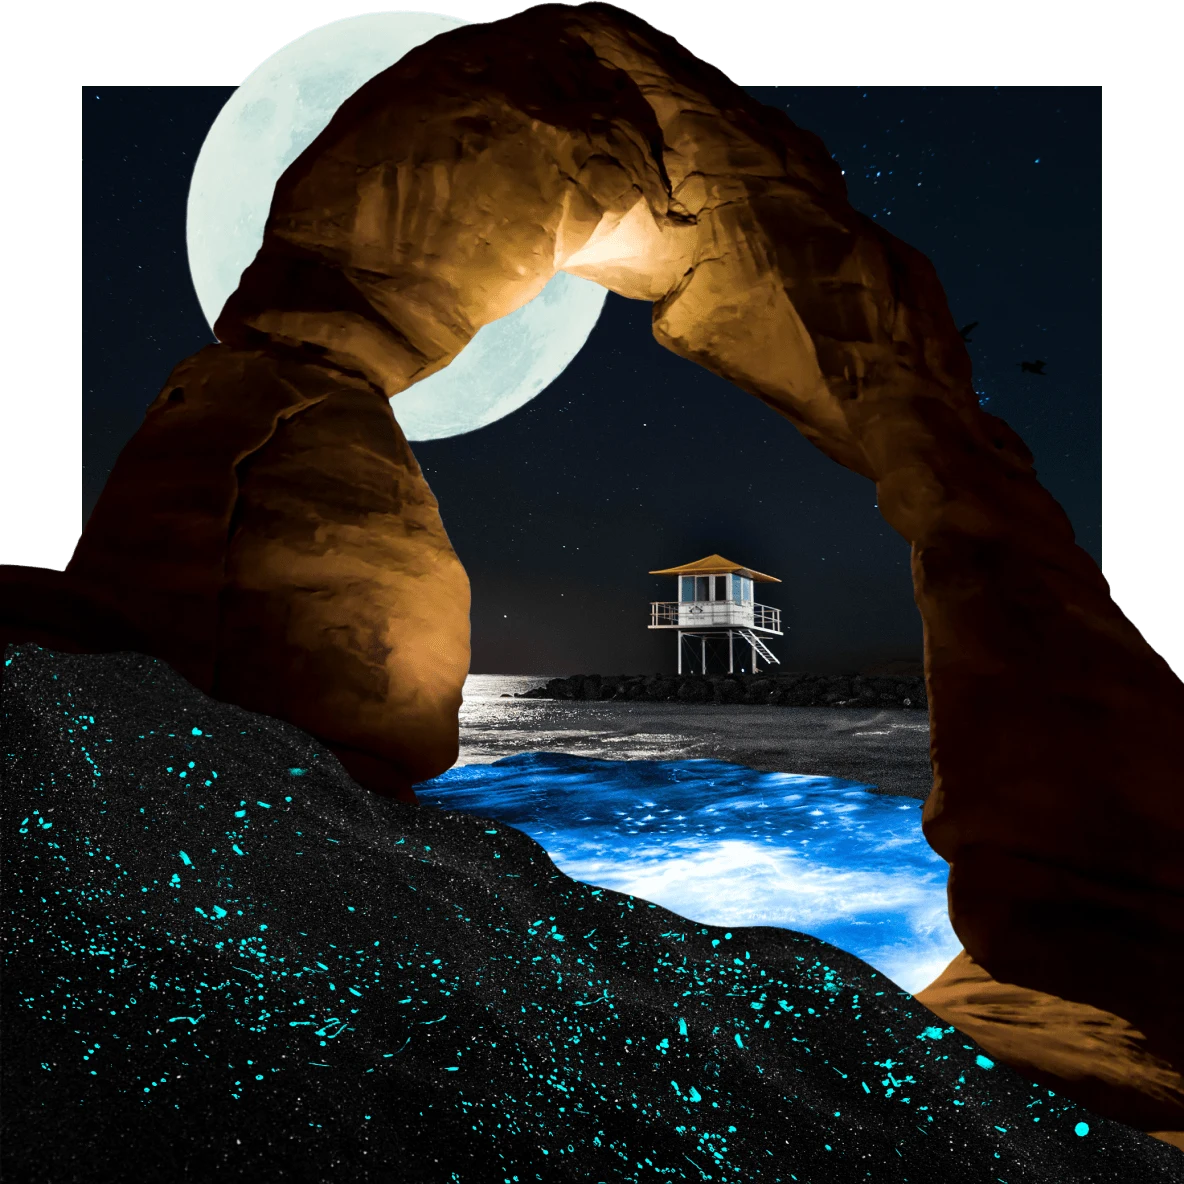 A glowing pool of water under a red stone archway. Full moon in the background shining on a beach hut with stairs on ocean rocks. Blue neon specks against dark waves in the foreground.